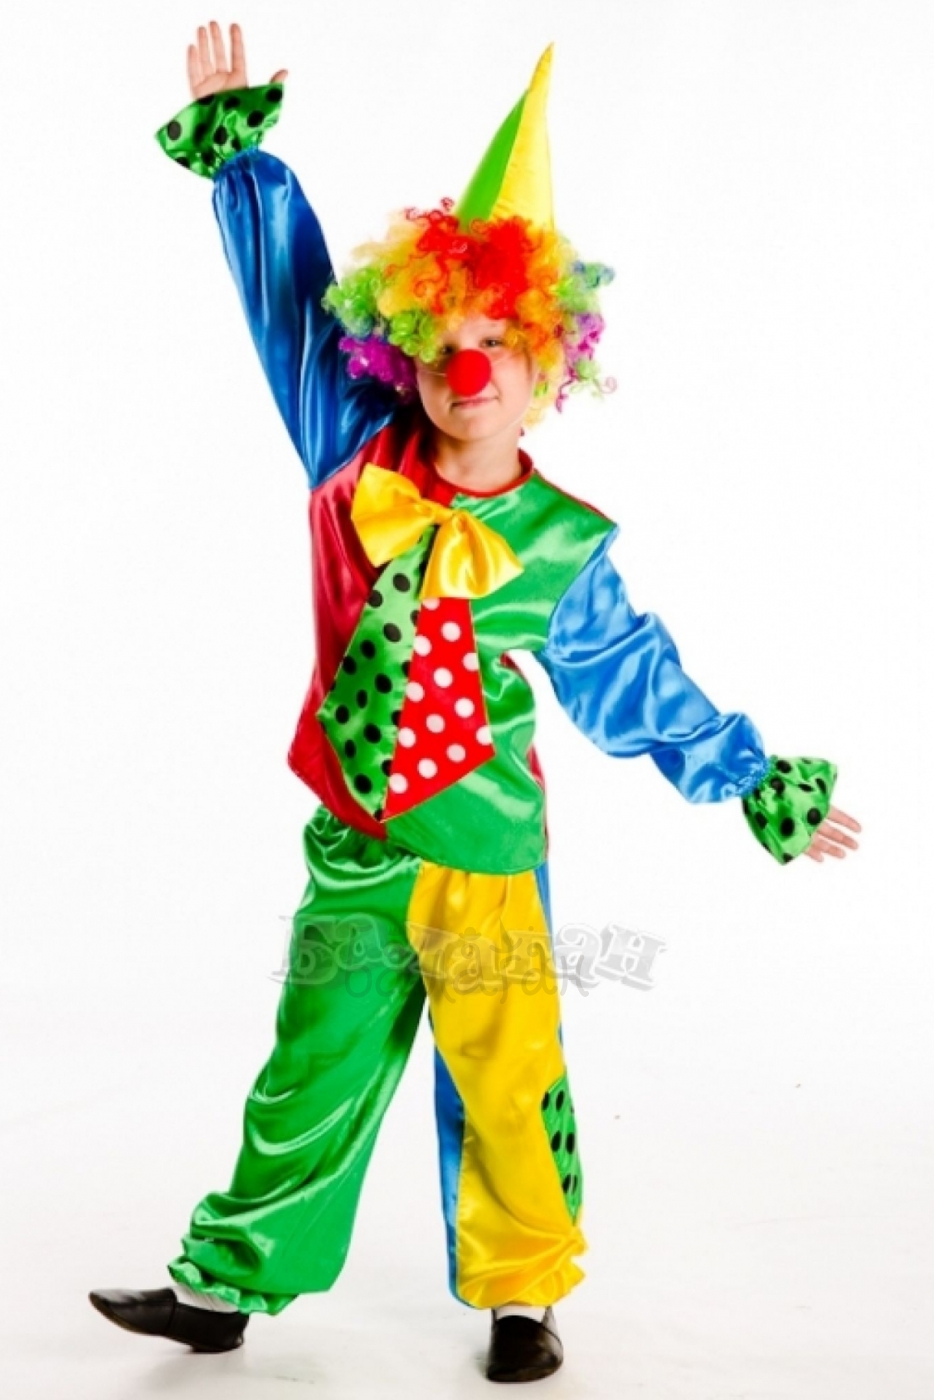 Clown funny red nose costume for a little boy